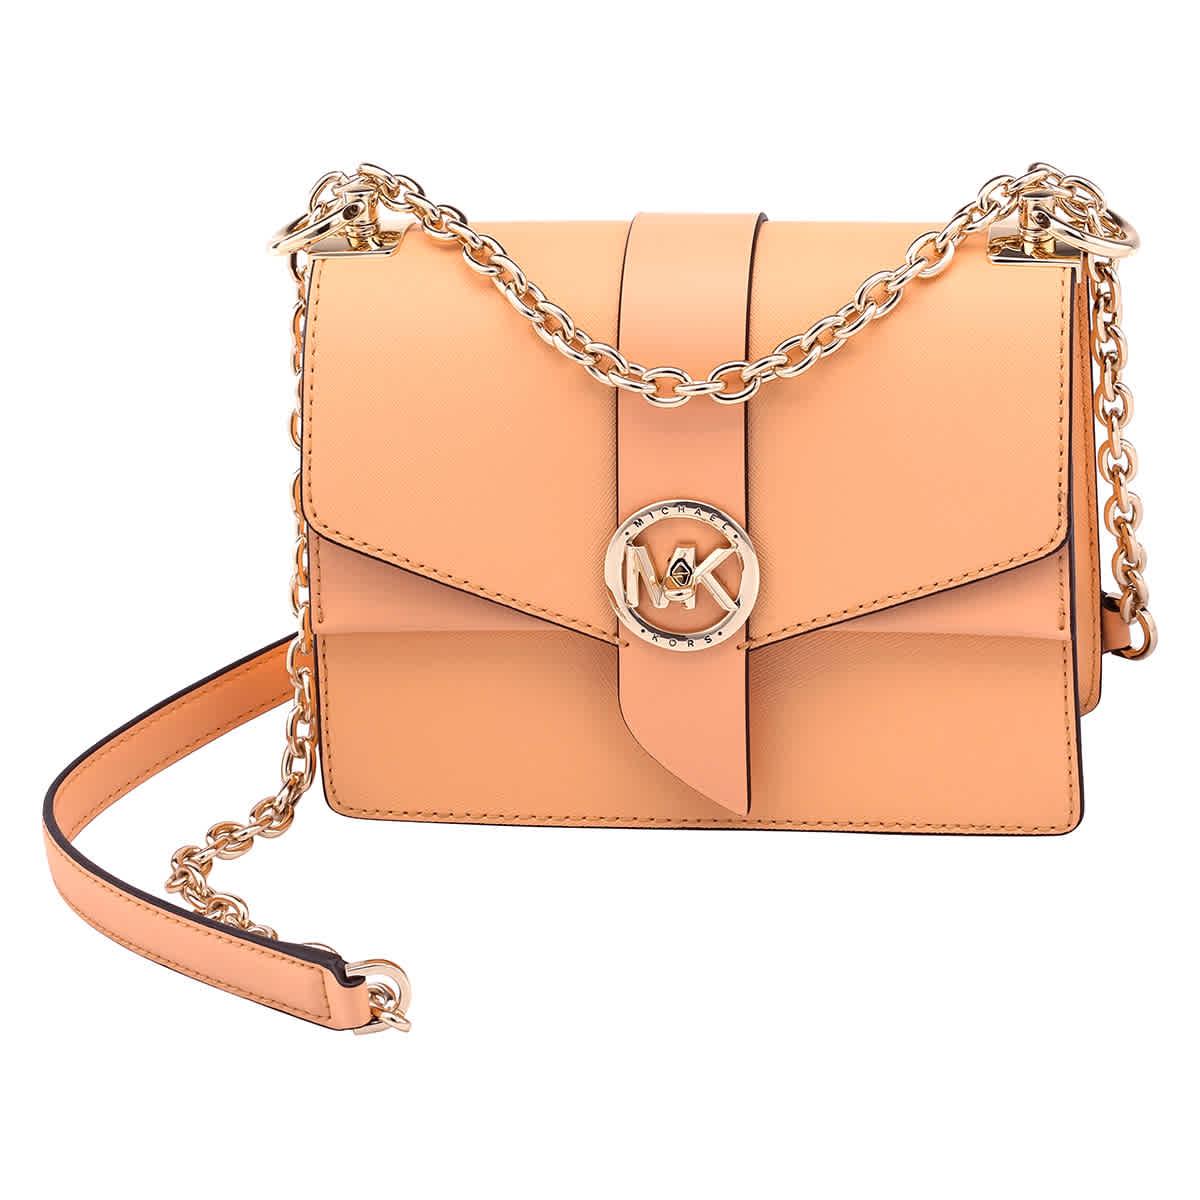 MICHAEL KORS Greenwich Small Two-Tone Logo And Saffiano Leather Crossbody  Bag 